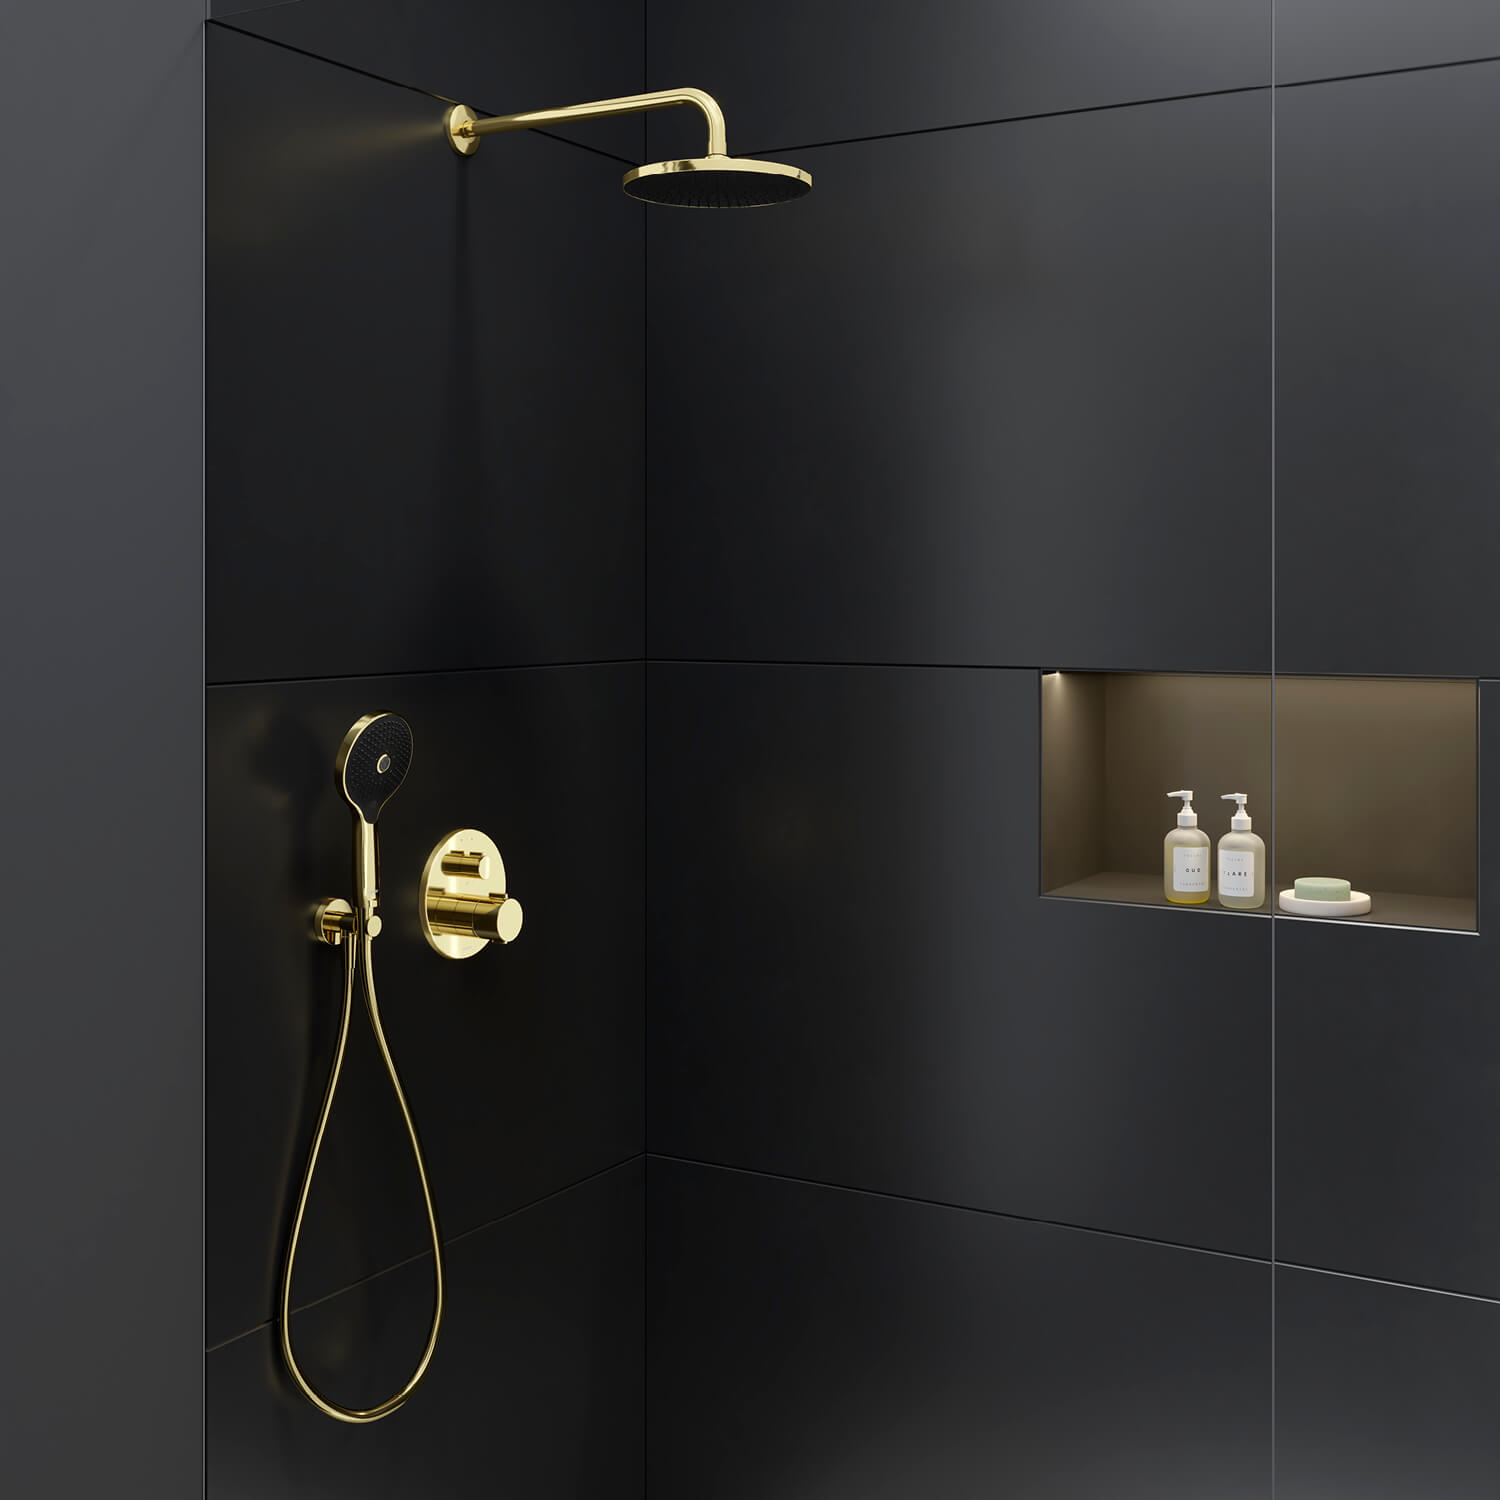 Hand-shower in polished gold
